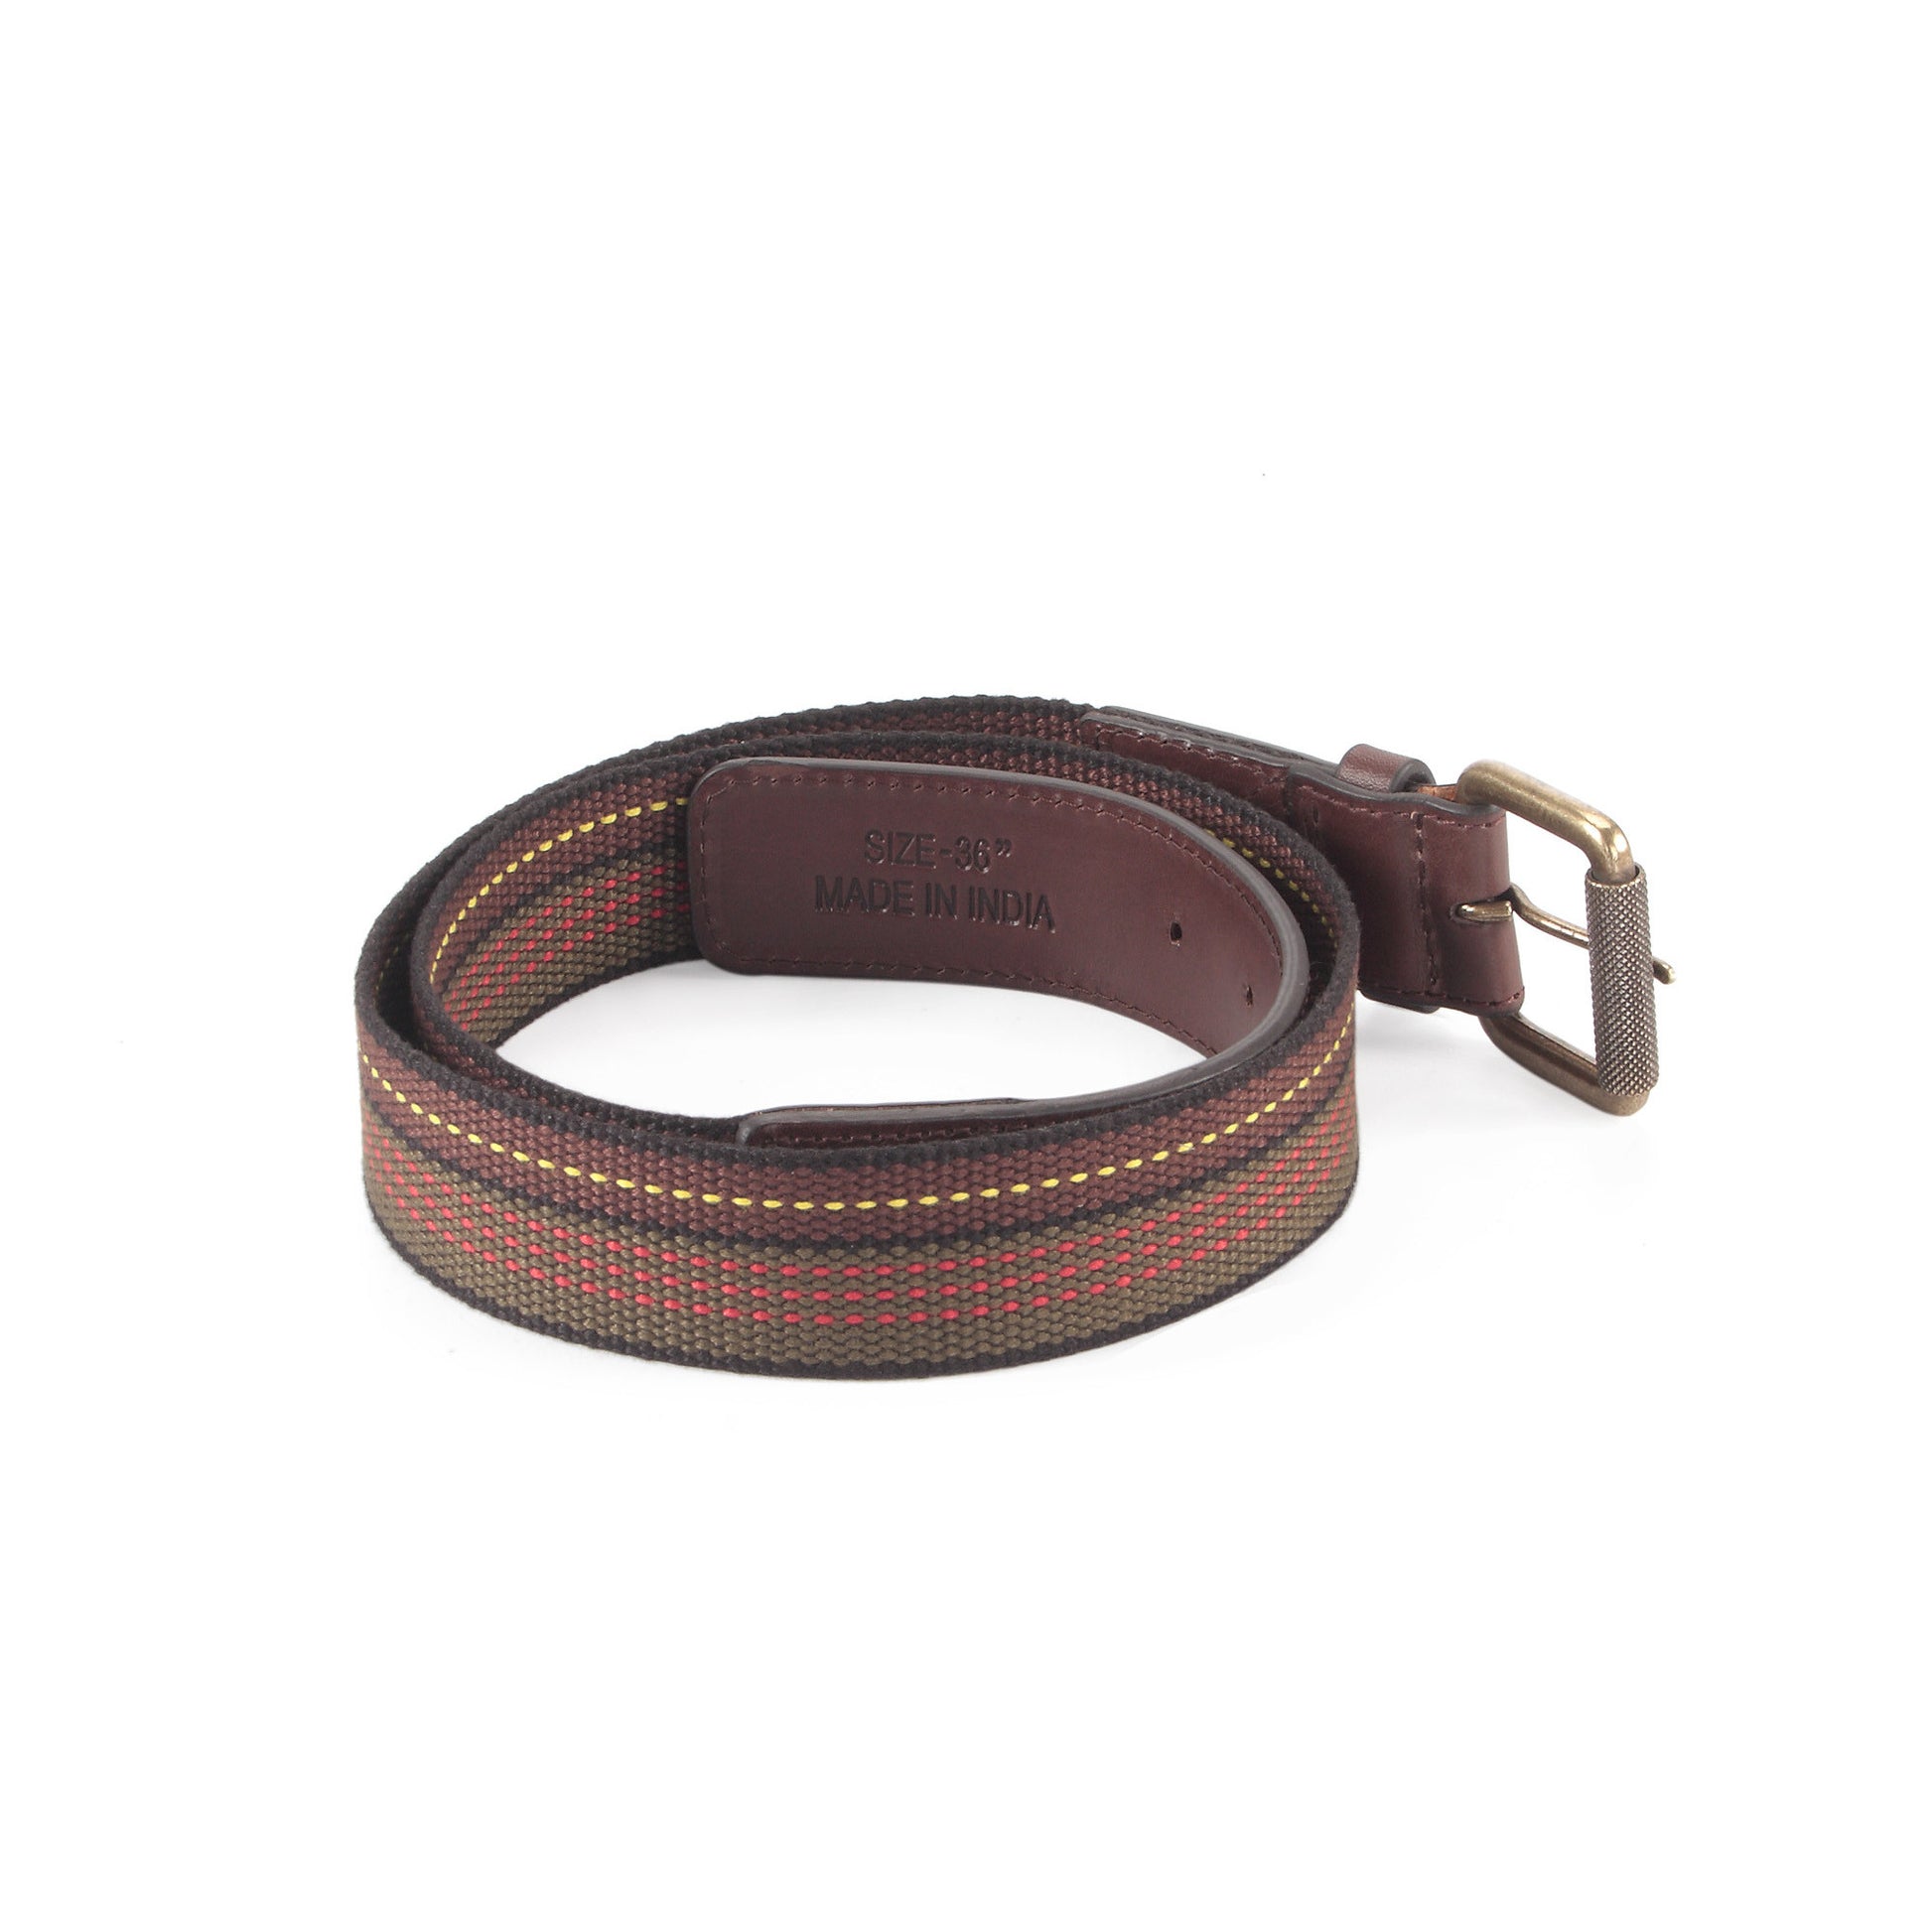 390306 - One and a Half Inch Wide Leather Webbing Combination Belt - brown color leather - back view